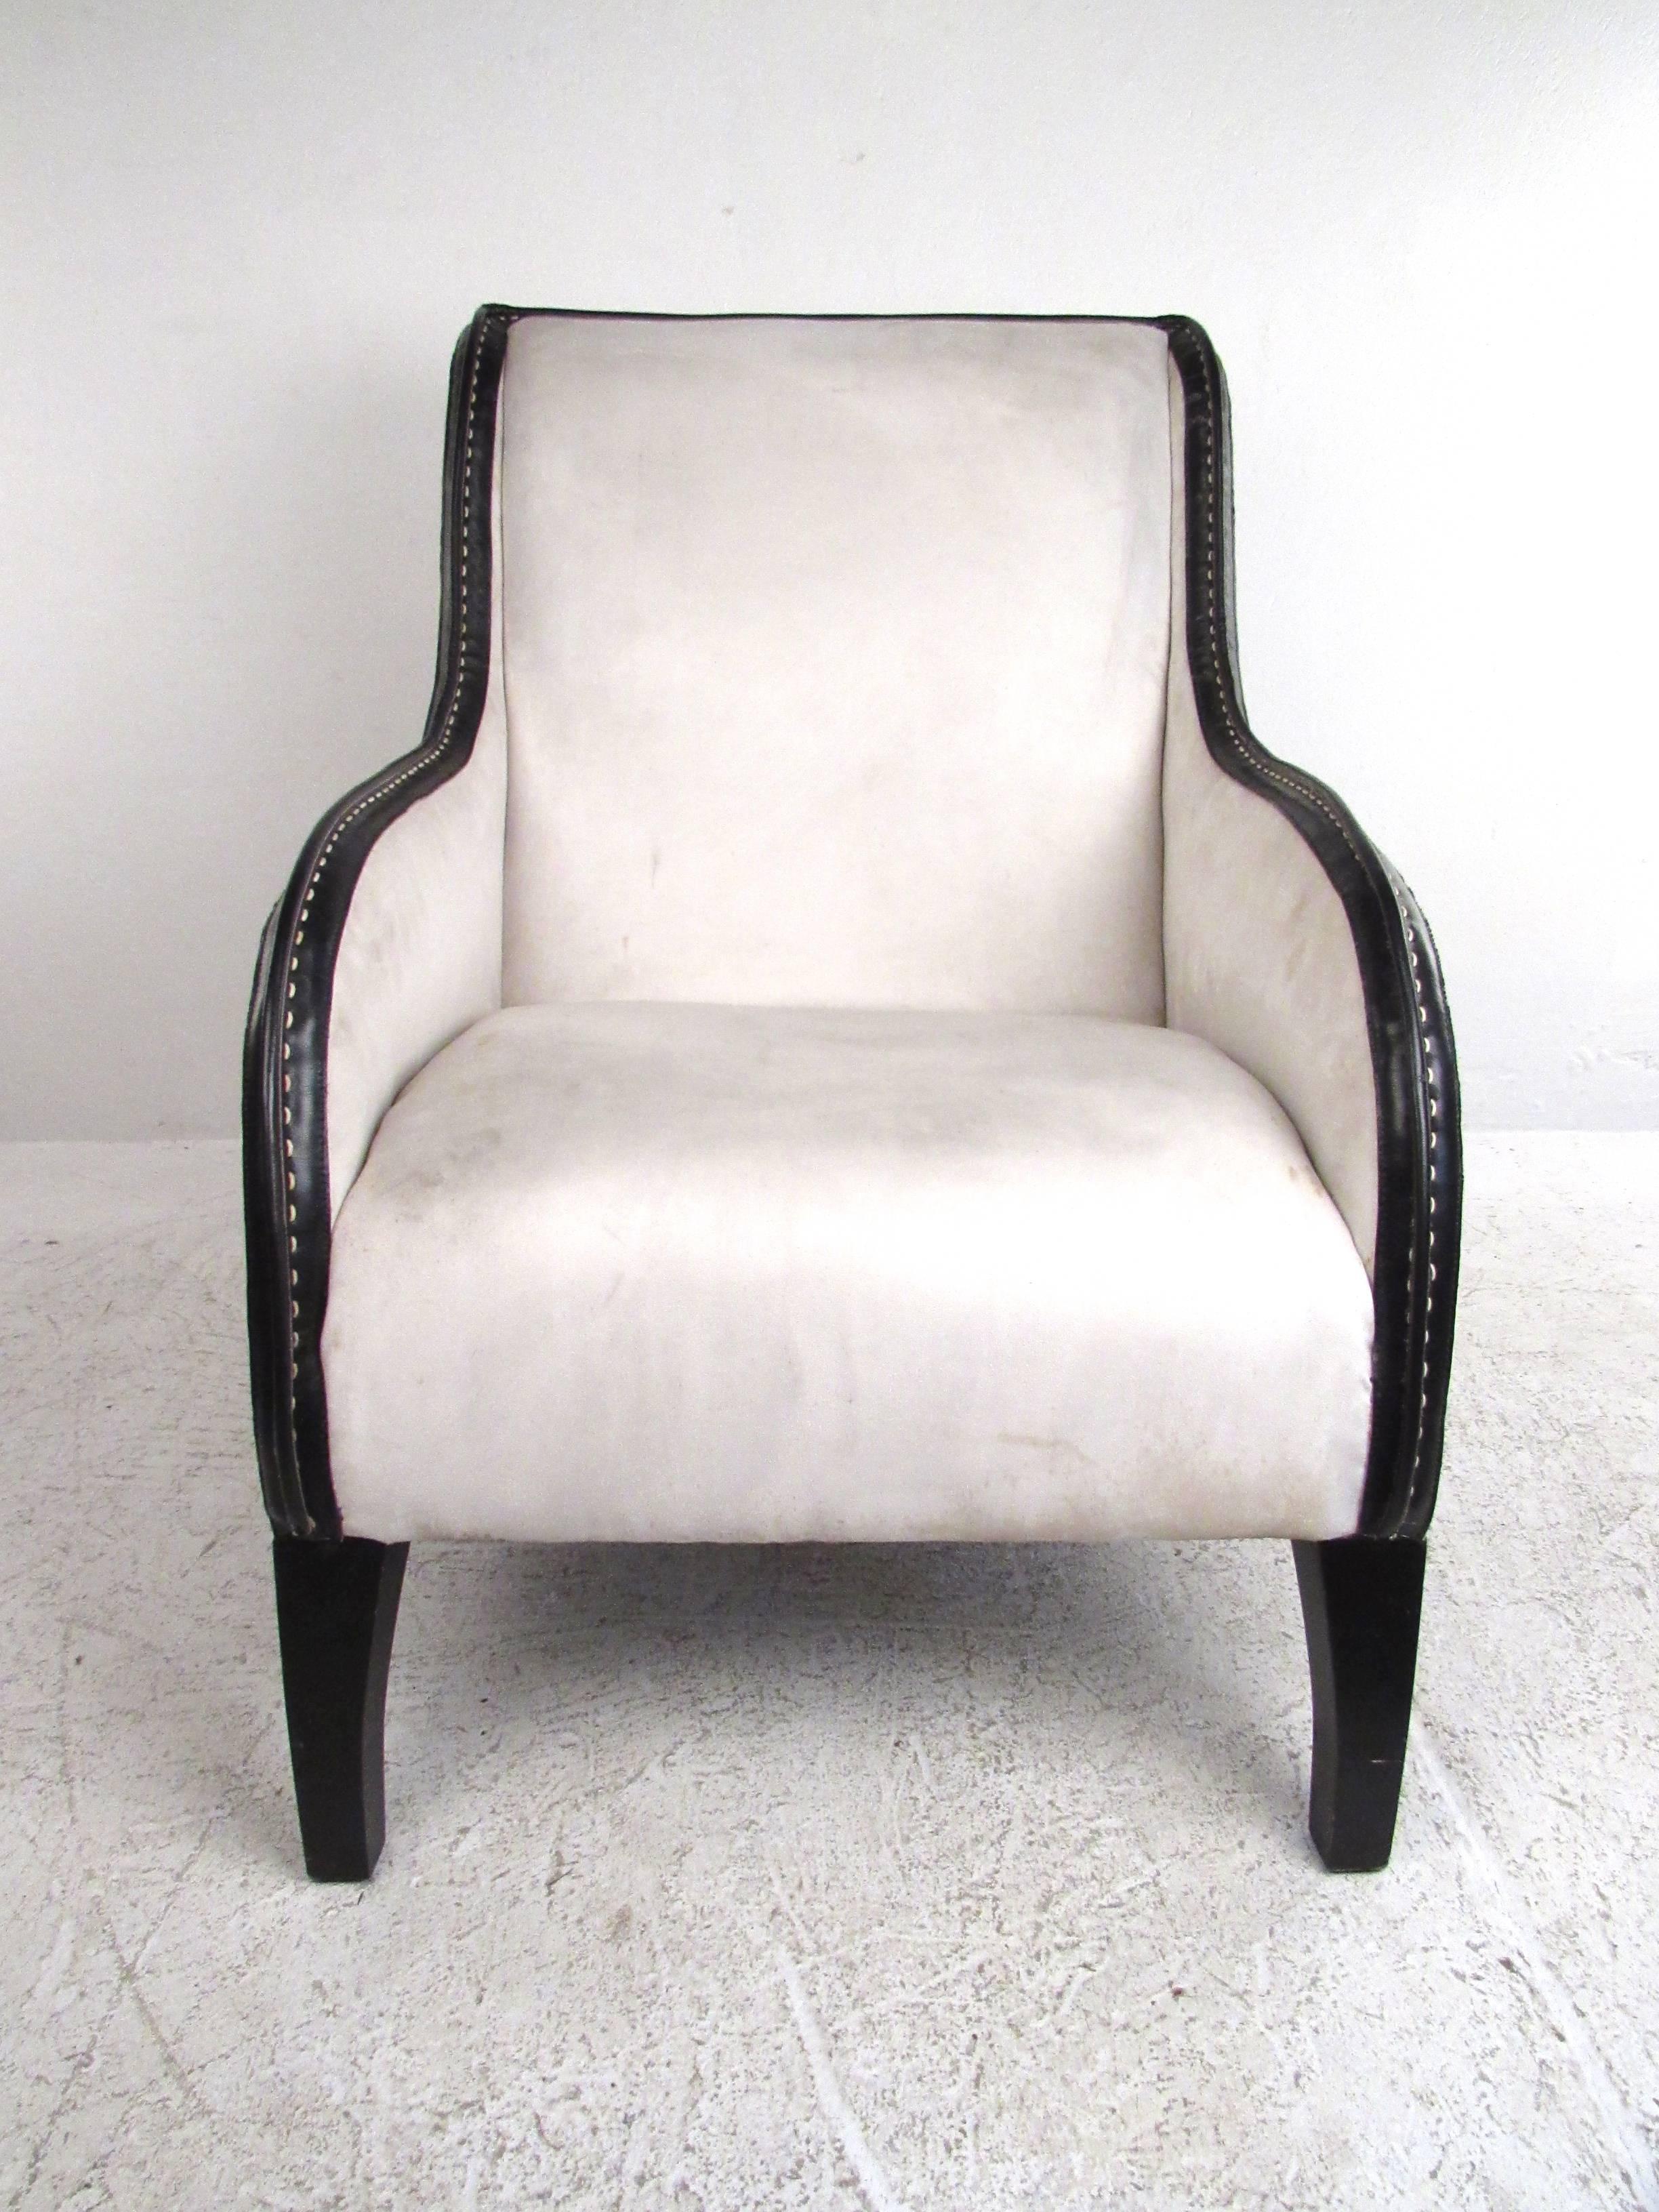 This stunning Italian style lounge chair features a stunning sculpted frame, complete with rounded high back seat and gradual leather trim armrests. The perfect mix of elegant design and timeless comfort make this unique armchair a wonderful